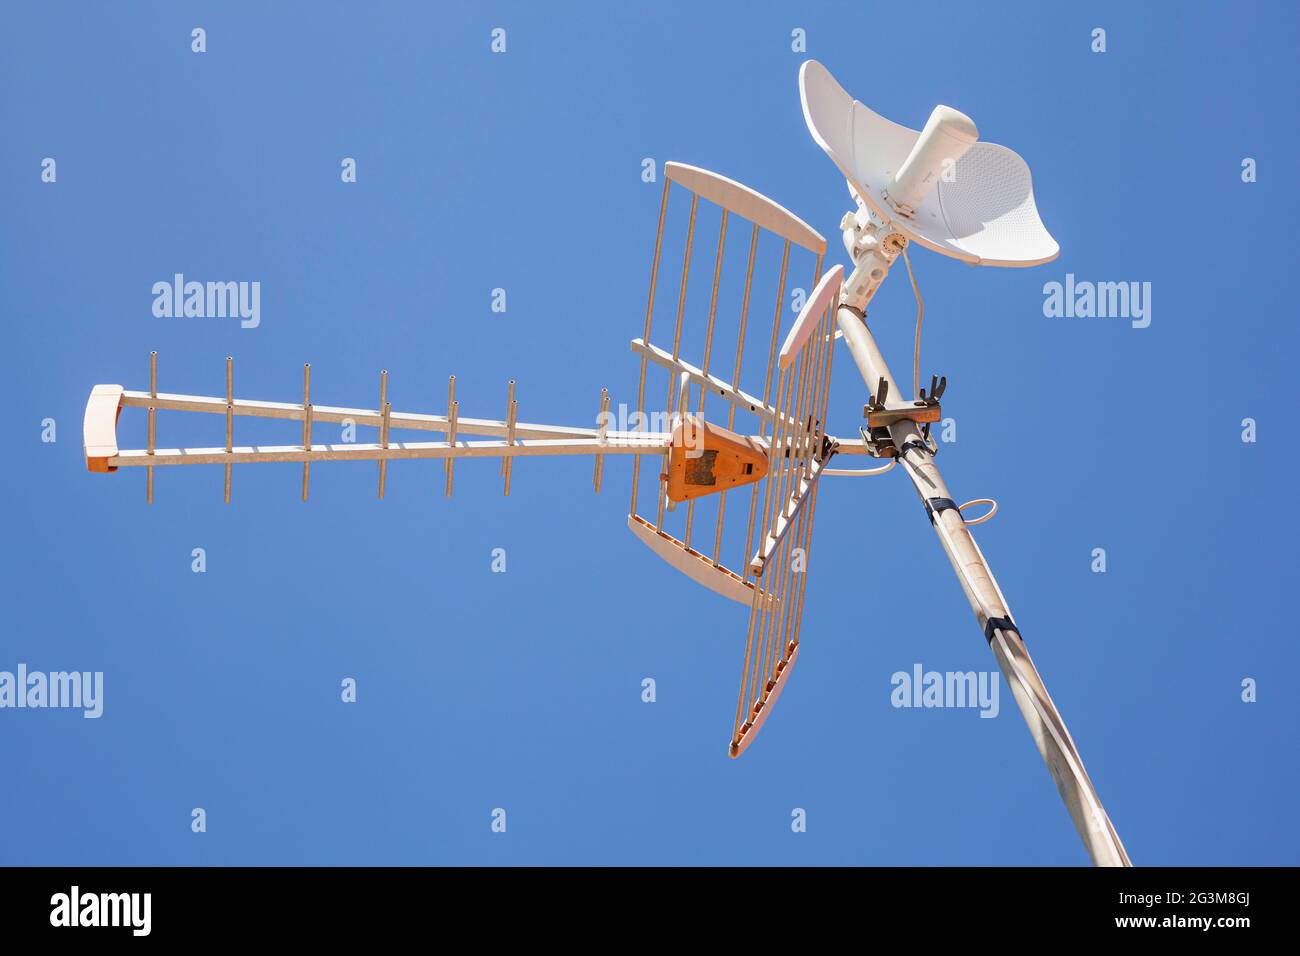 Television and internet antennas installed on a metal mast with the clear blue sky in the background. Stock Photo